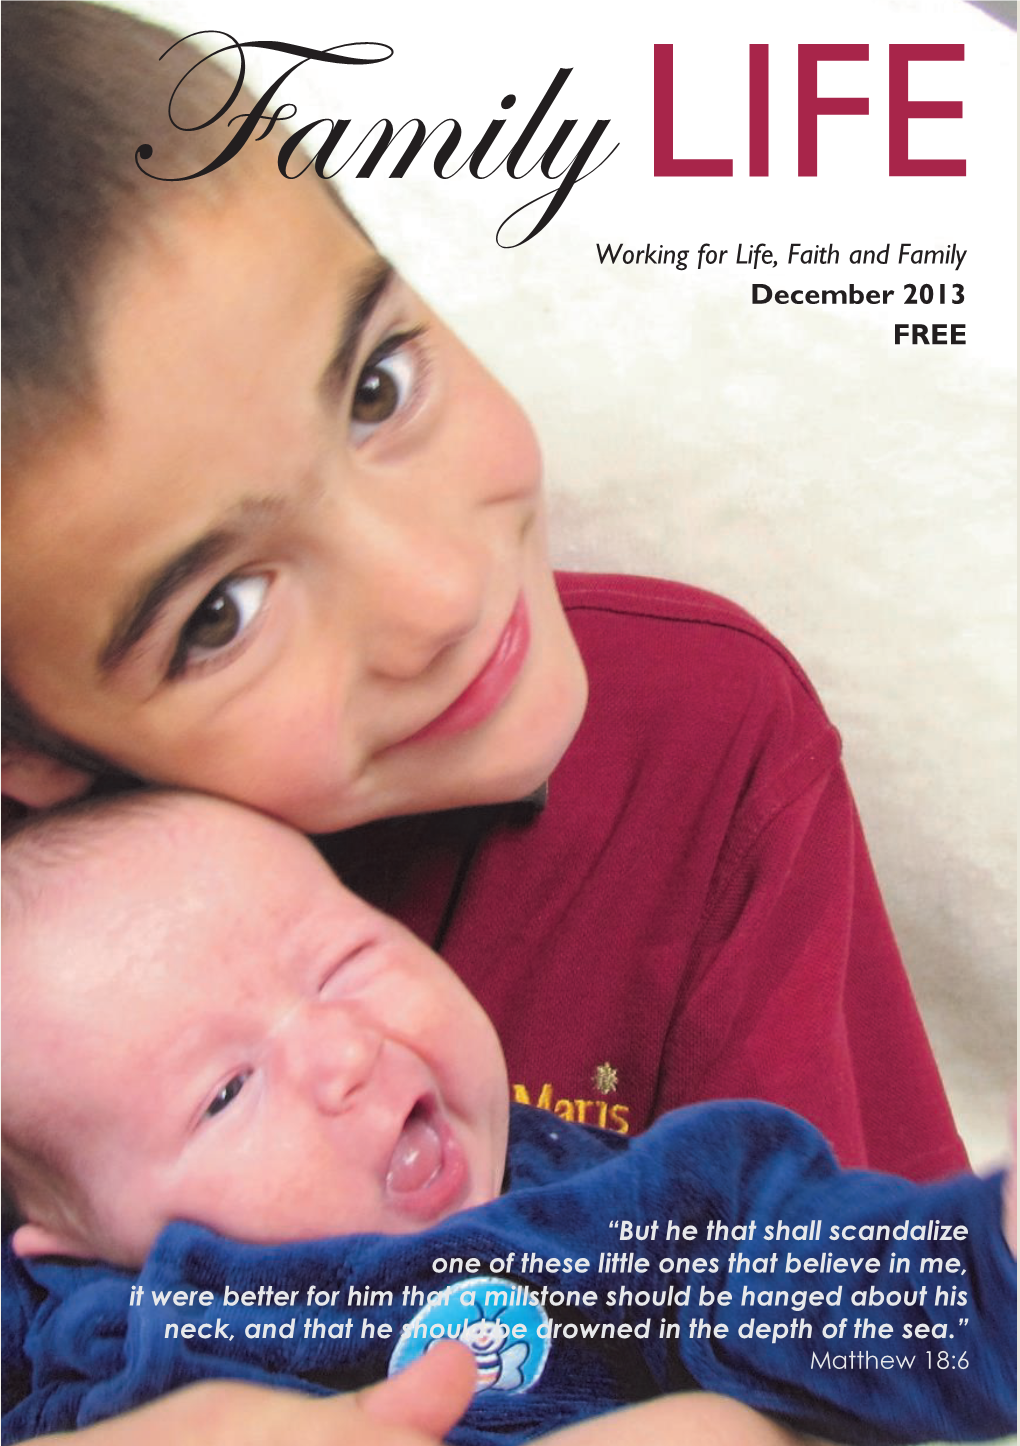 Working for Life, Faith and Family December 2013 FREE